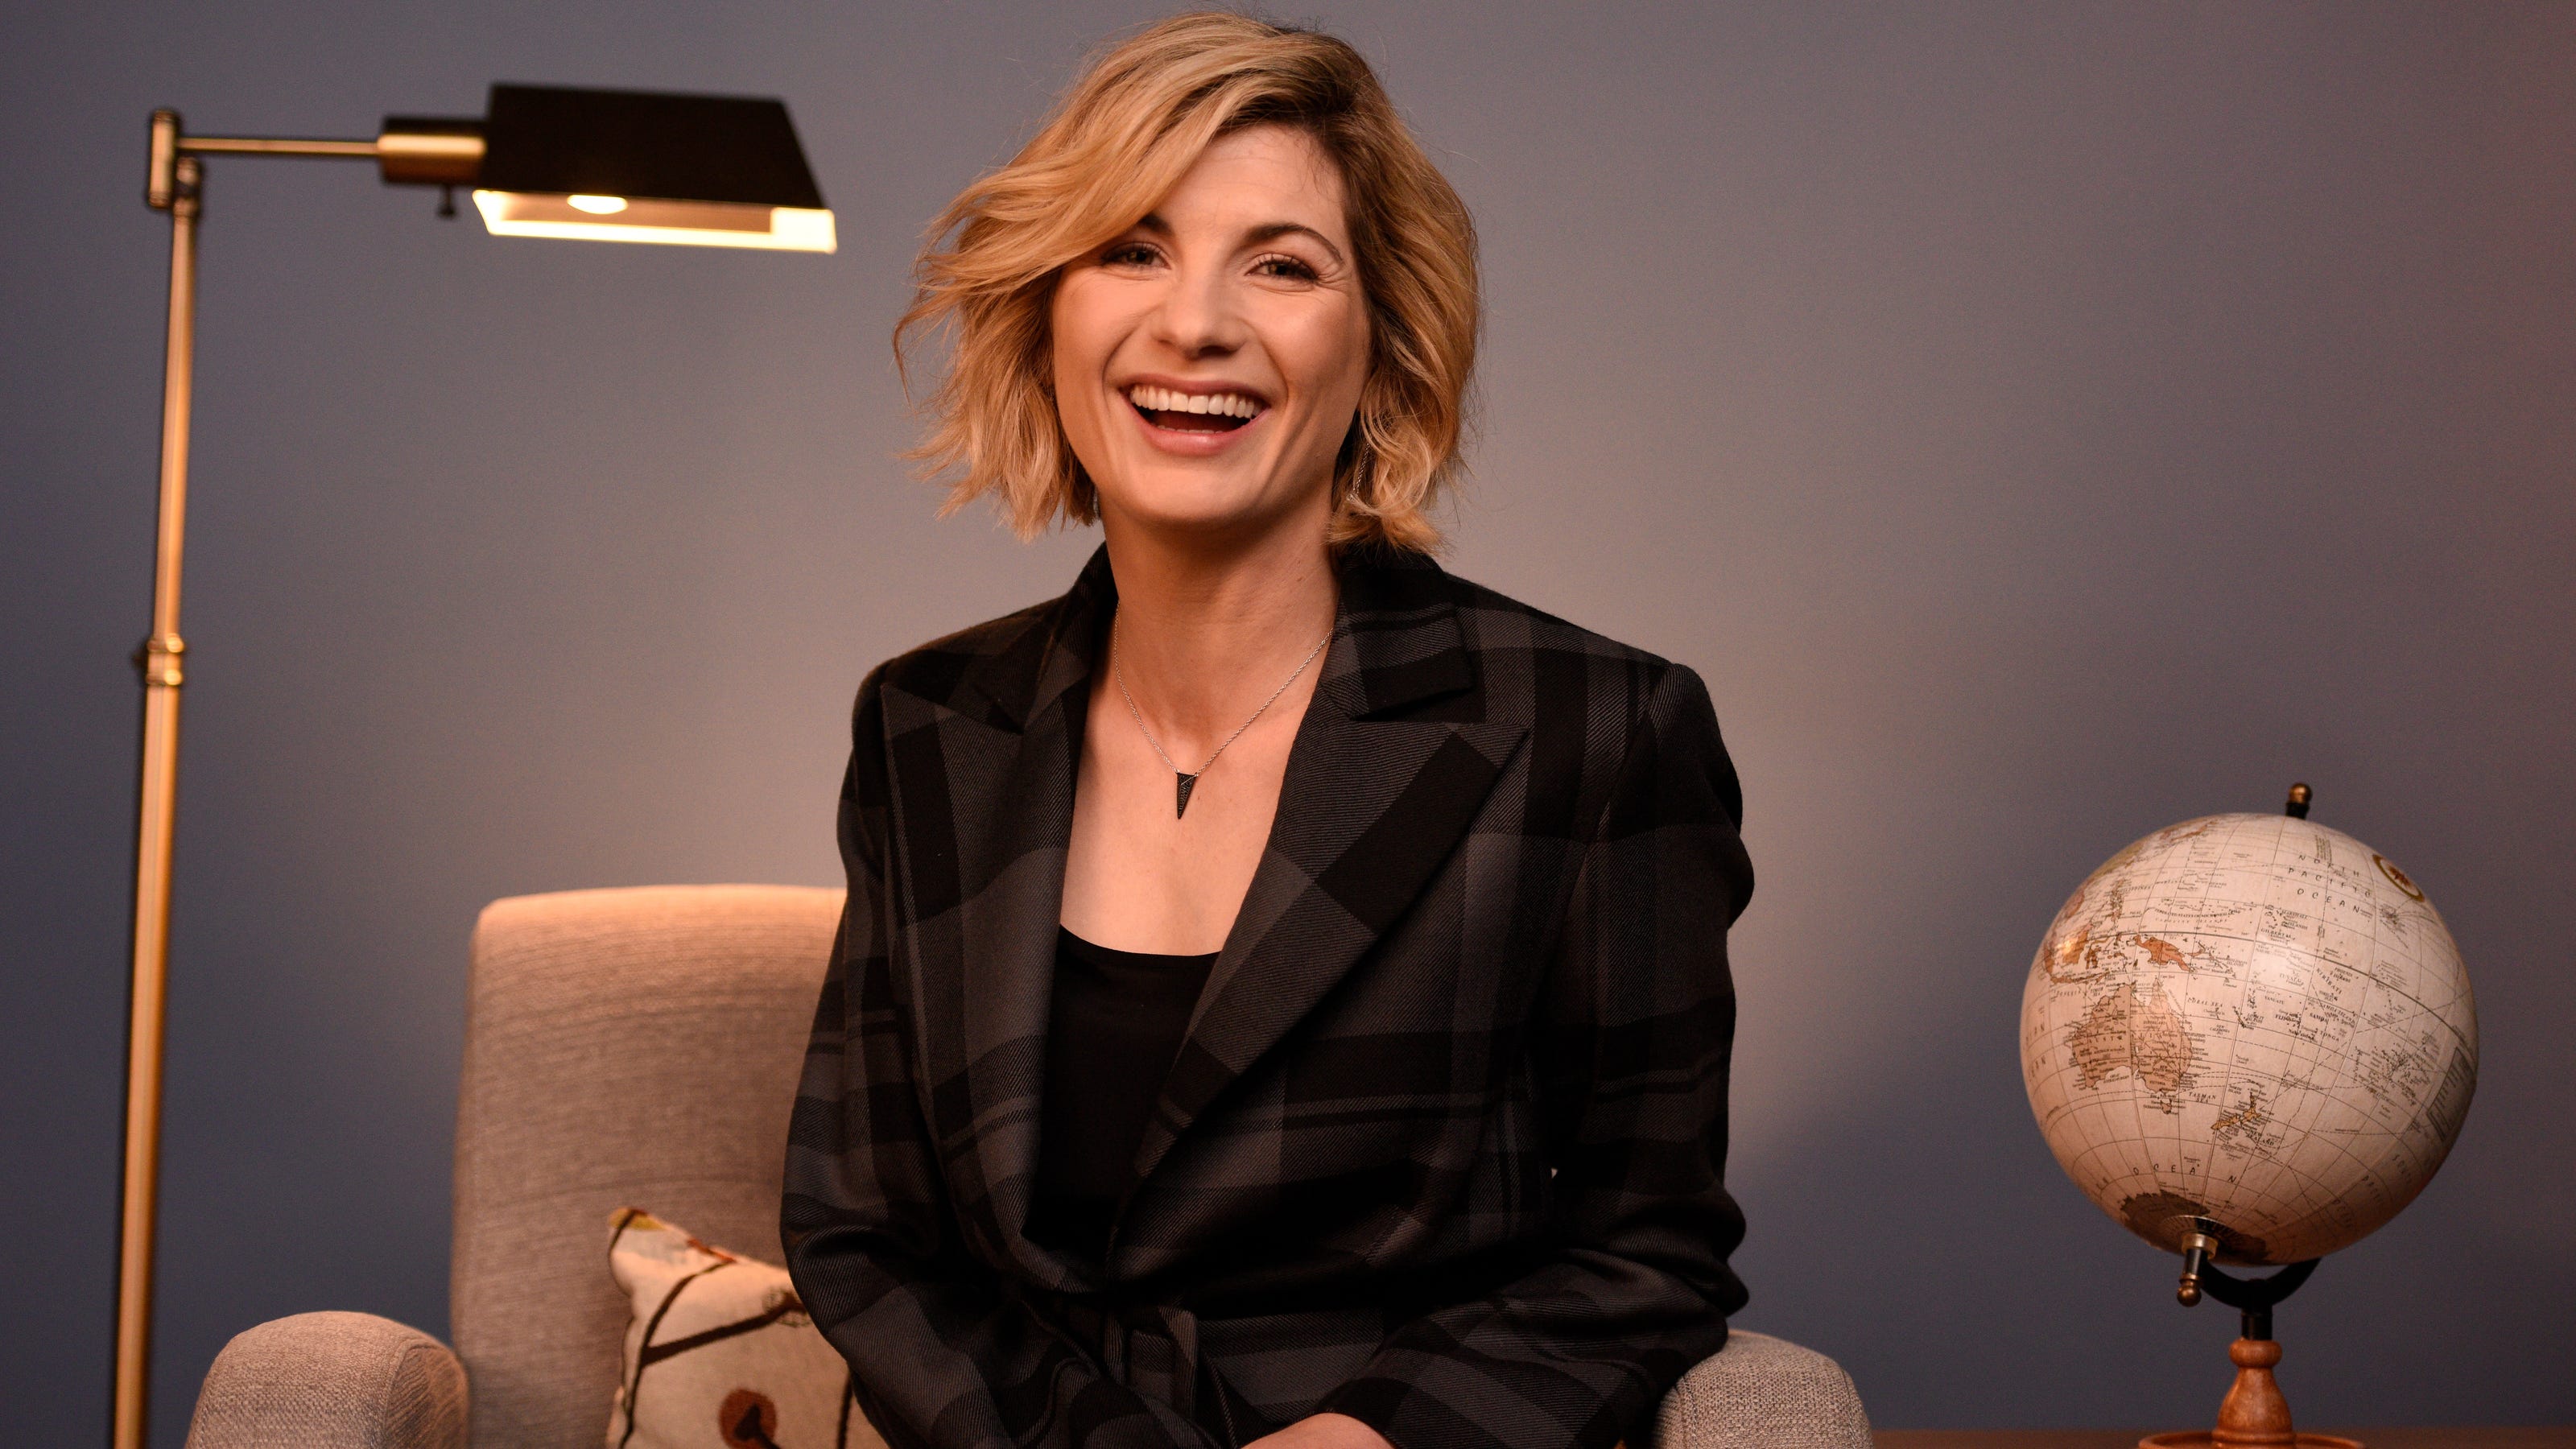 Doctor Whos Jodie Whittaker has an inspiring message for 